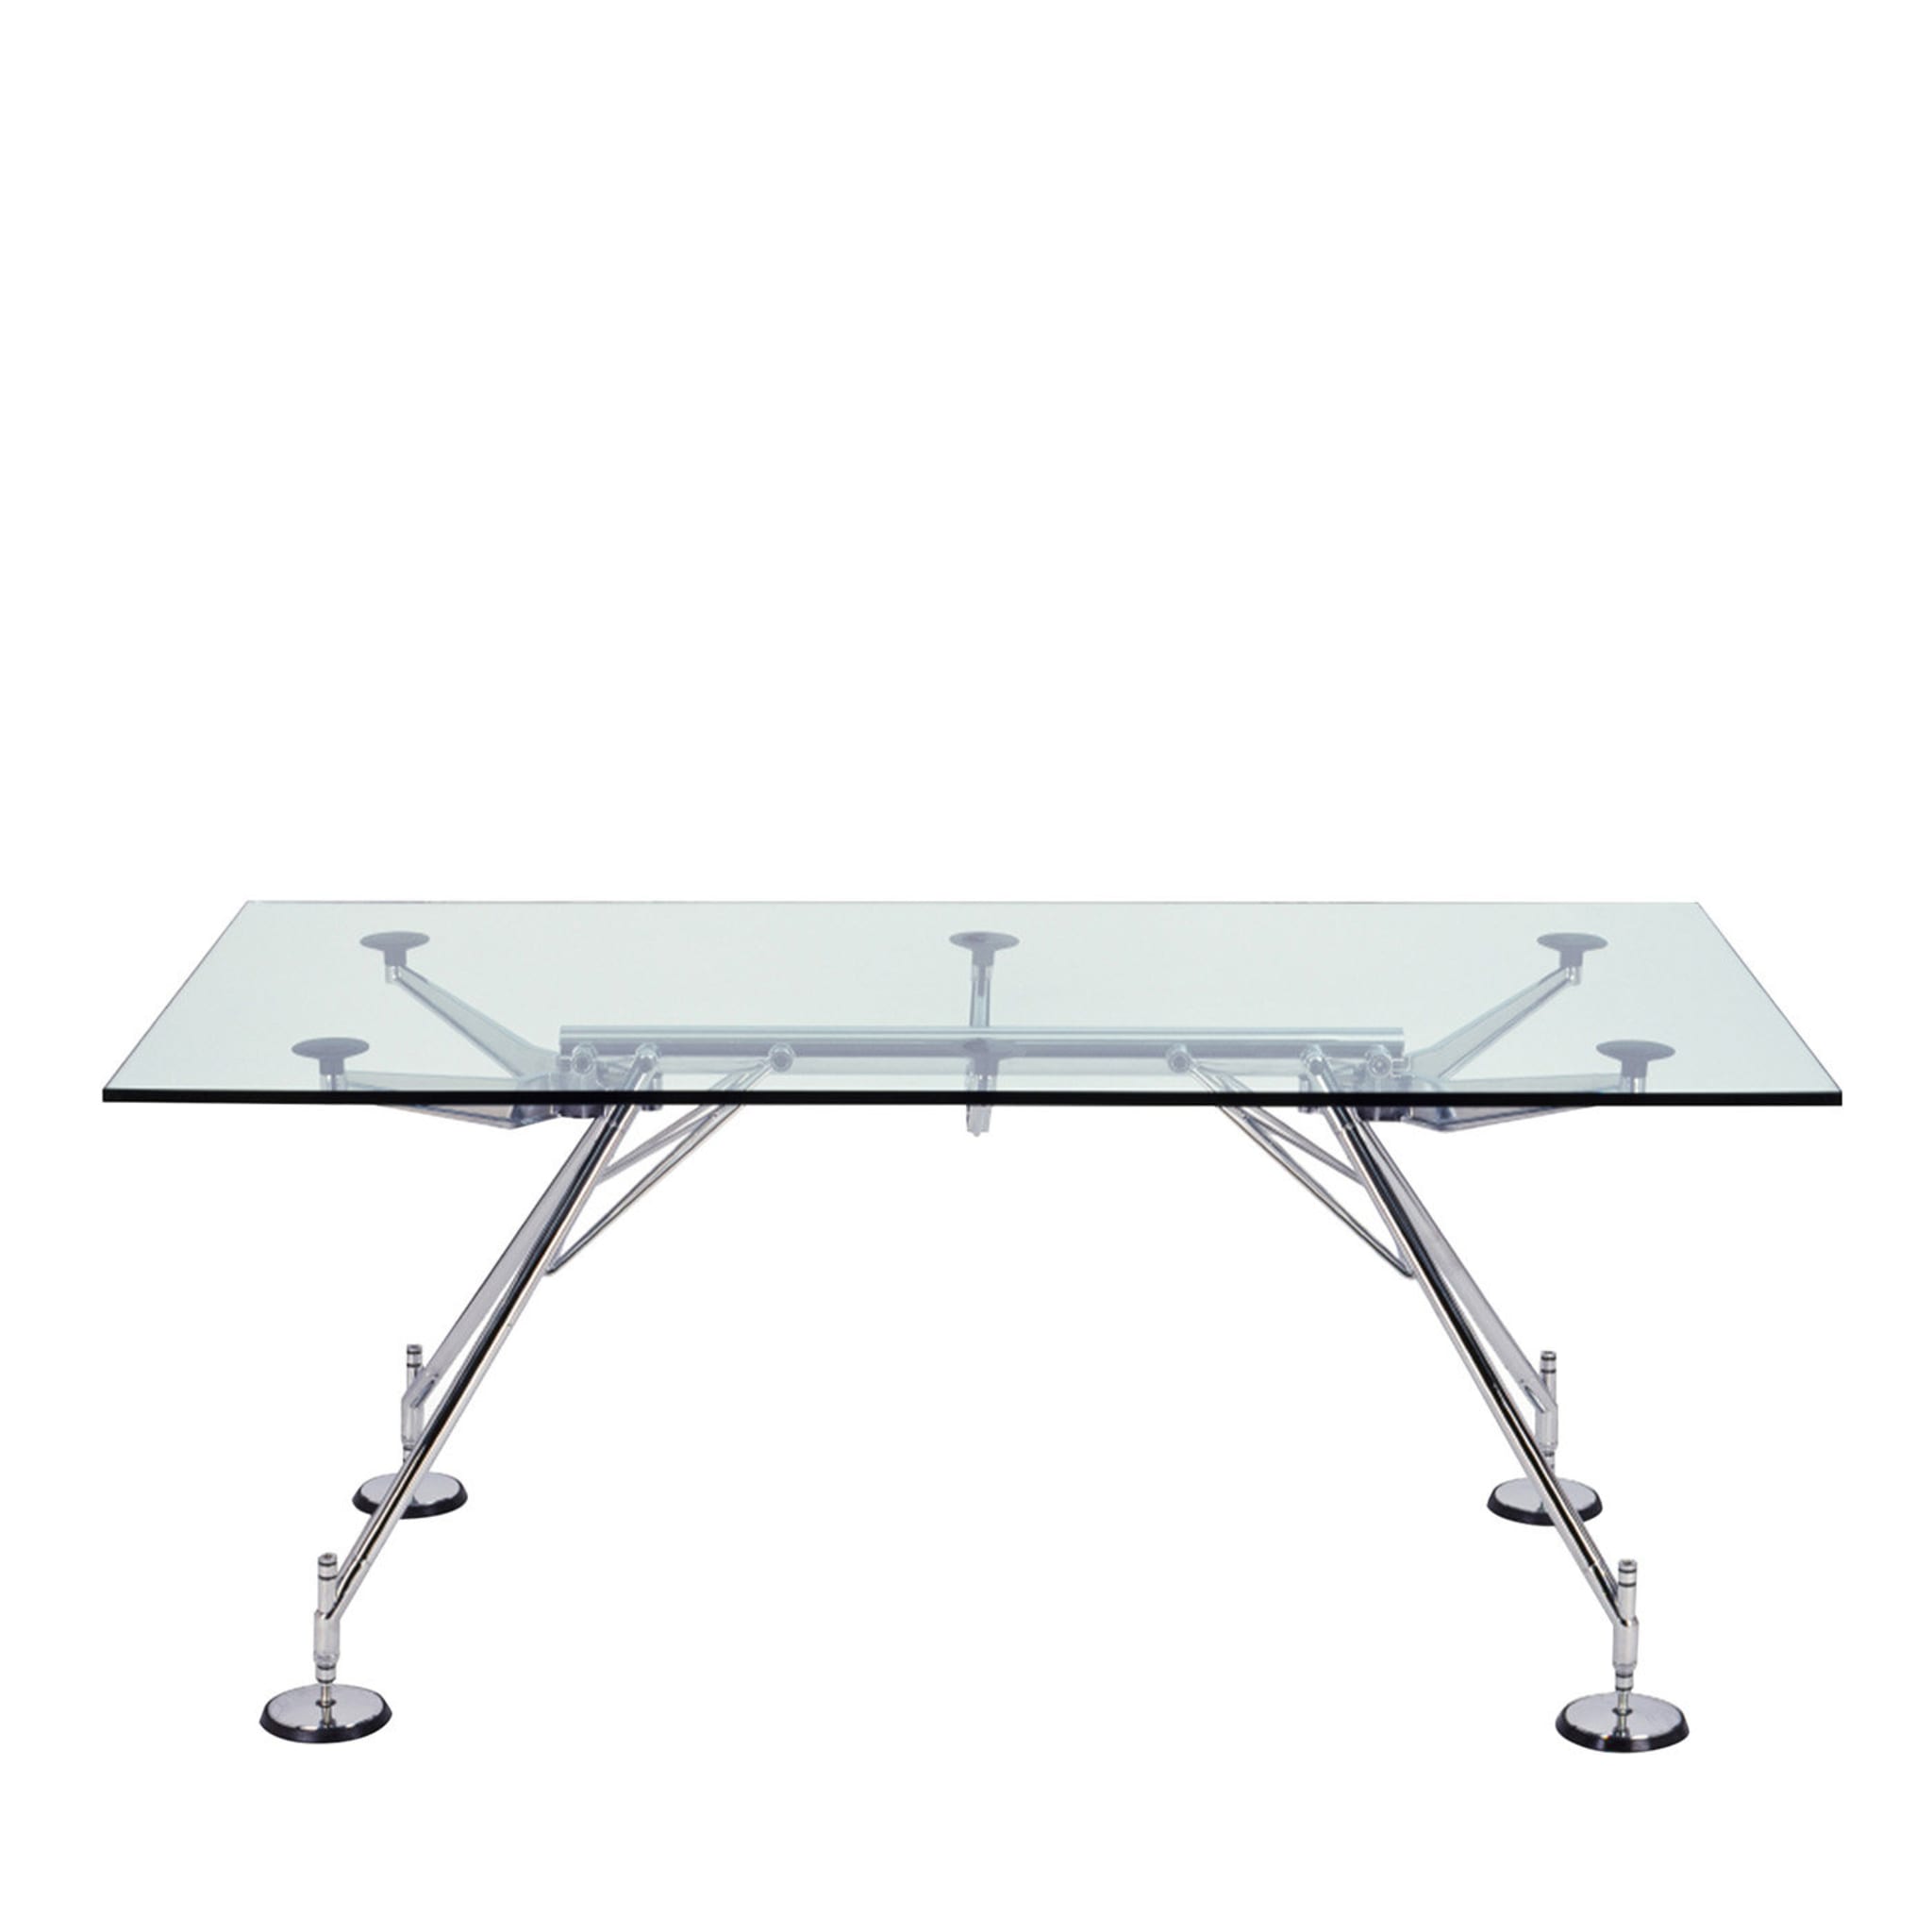 Nomos Small Table by Norman Foster - Main view